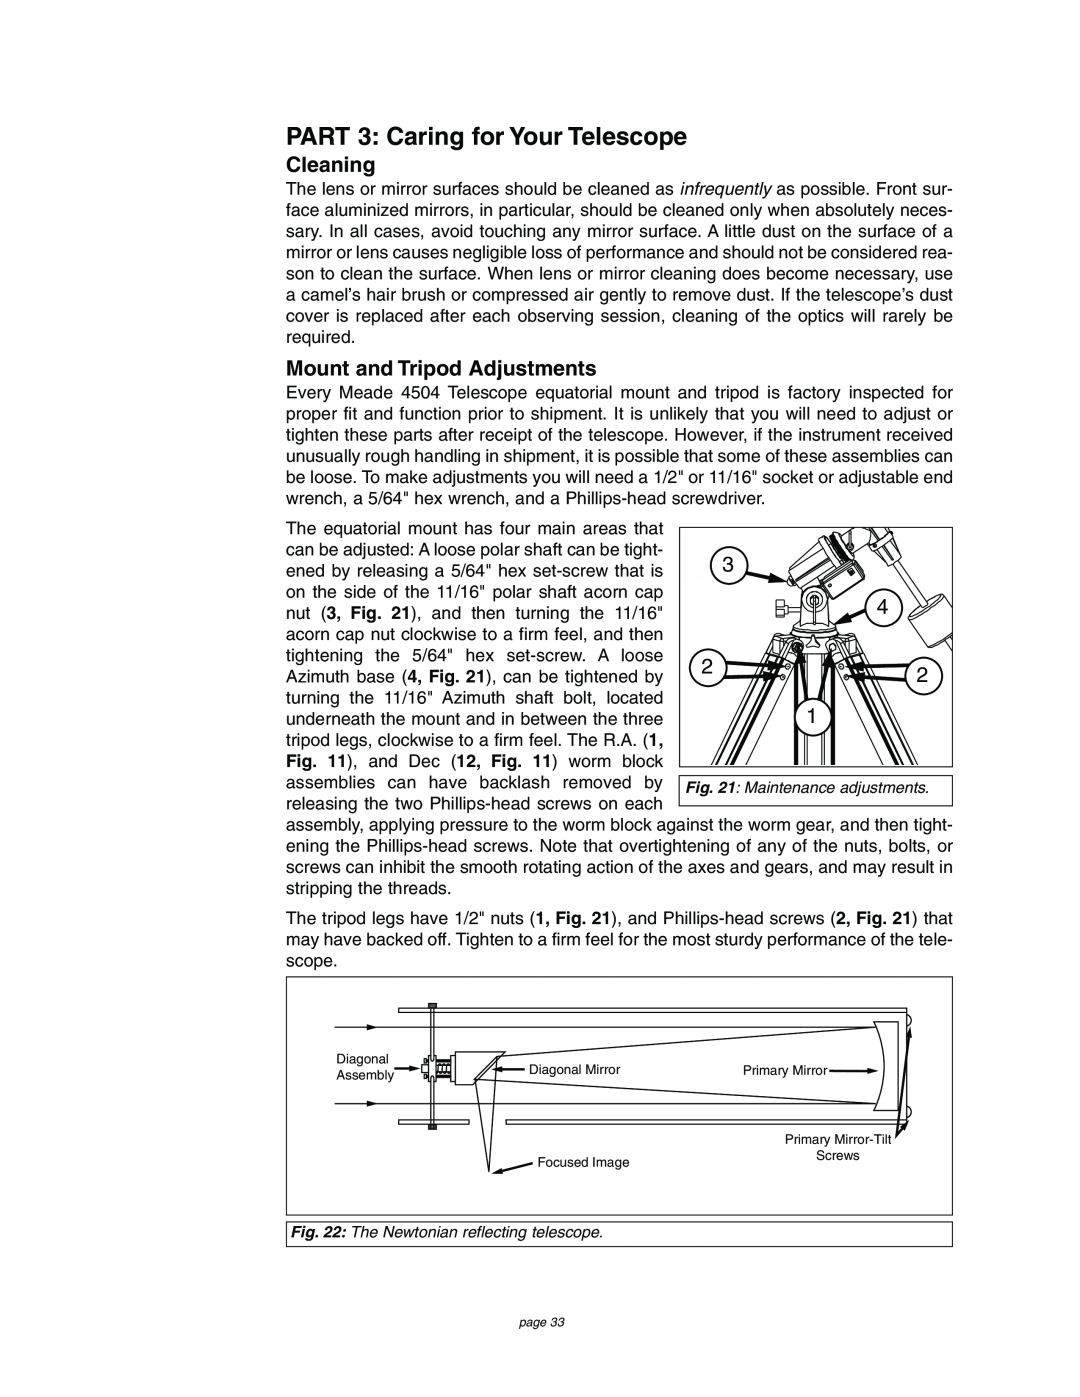 Meade 4504 instruction manual PART 3 Caring for Your Telescope, Cleaning, Mount and Tripod Adjustments 